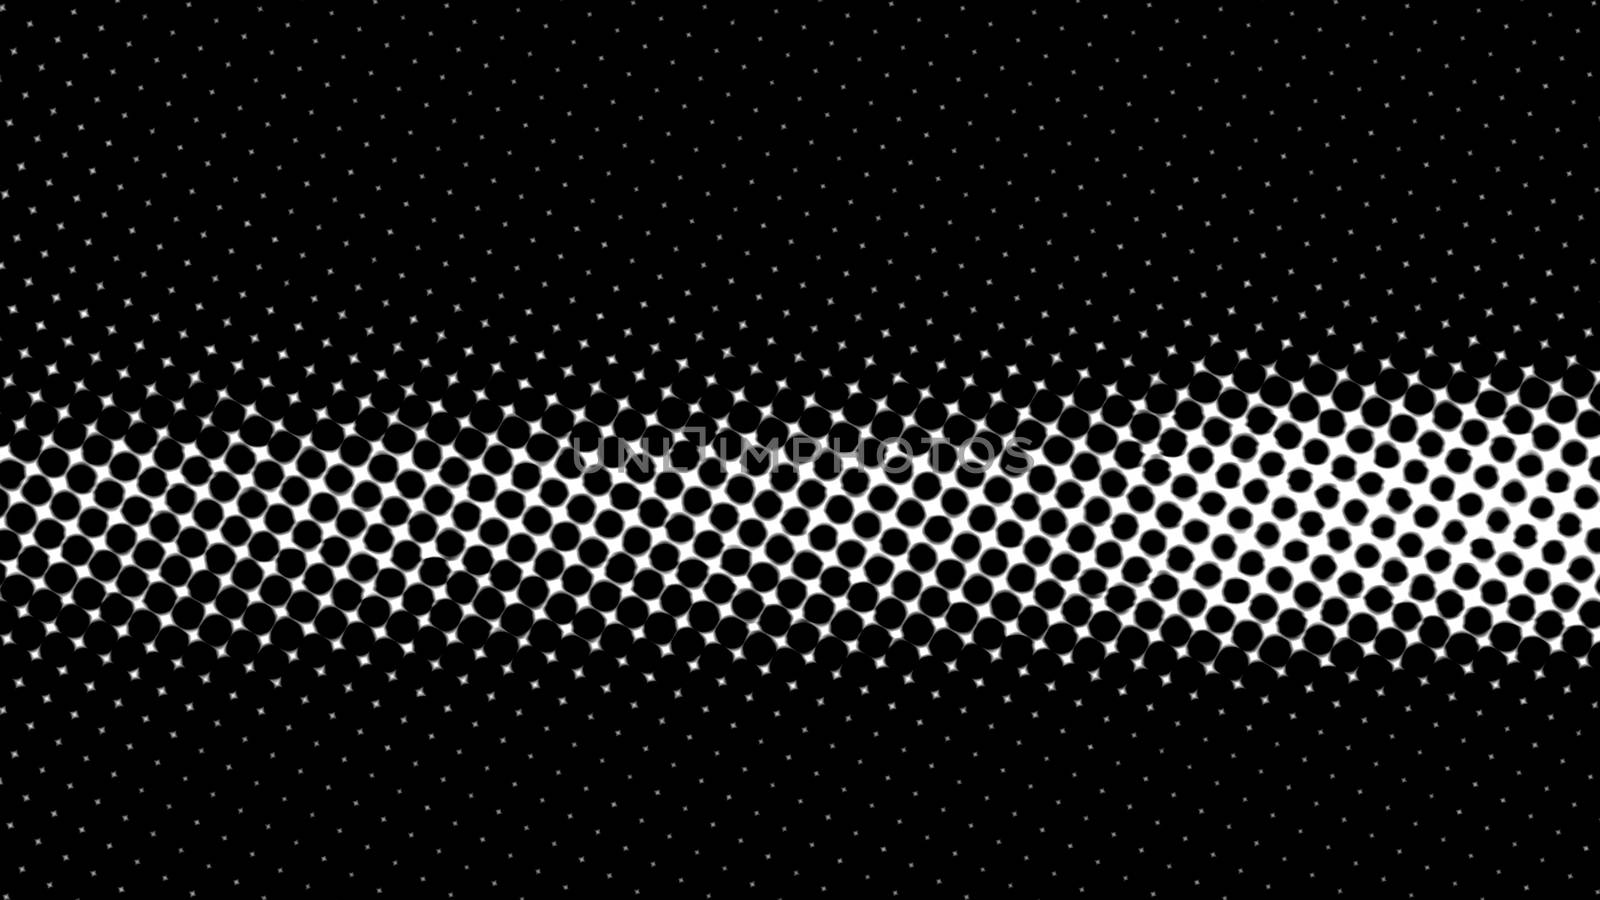 Halftone Abstraction 054. Black and white halftone screen image abstraction.